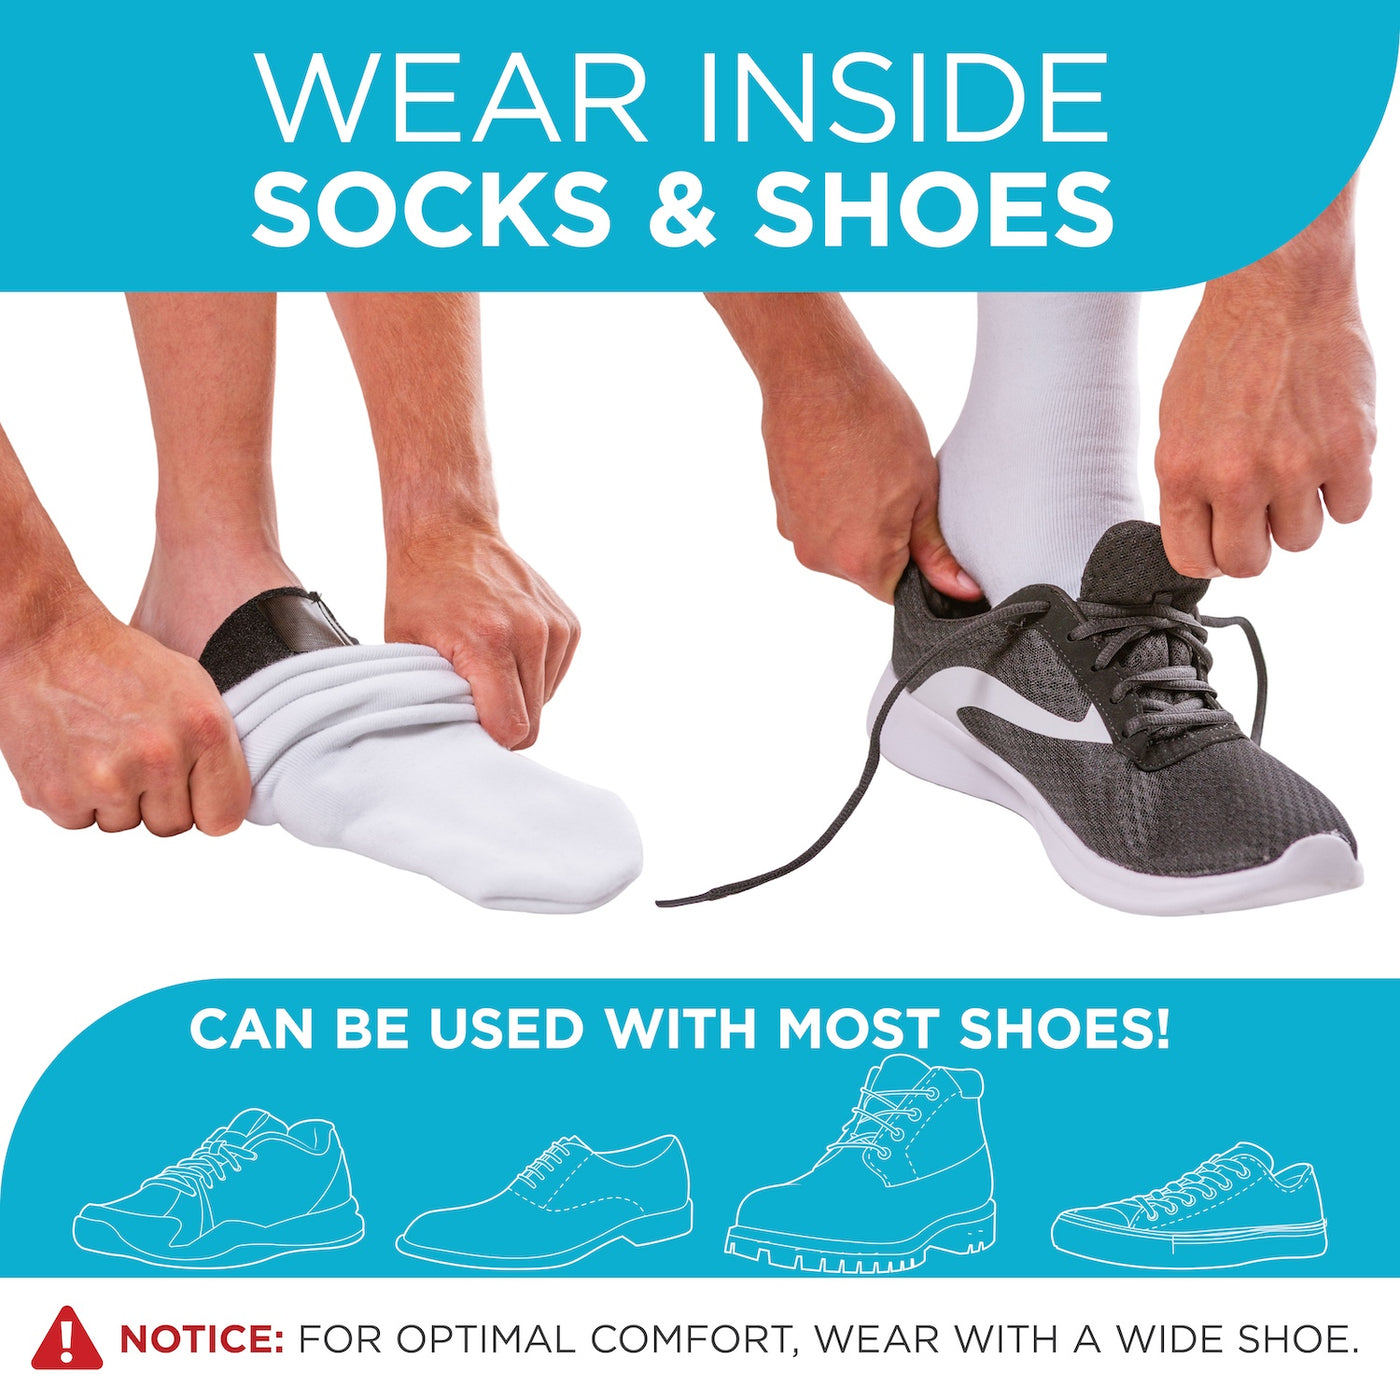 our comfortable toe wrap can be worn inside socks and shoes for all day support